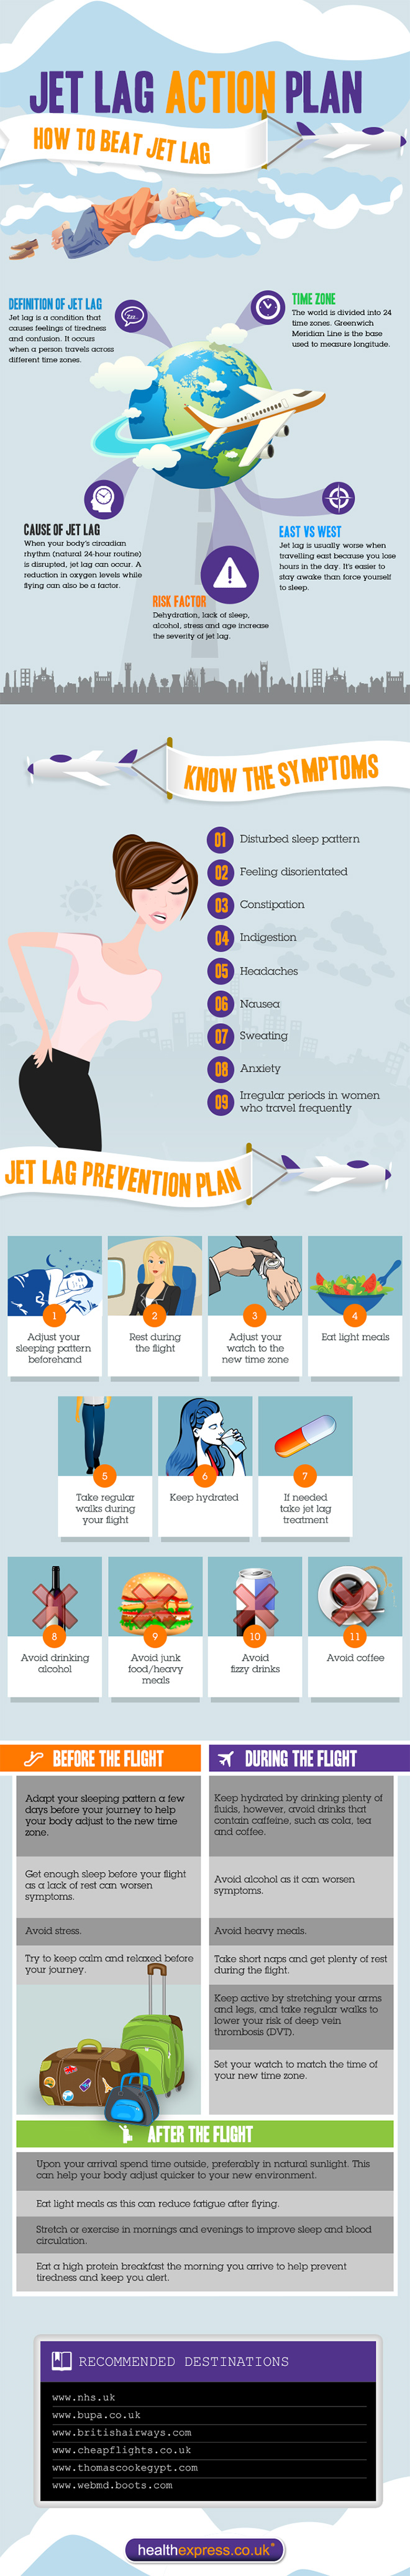 jet-lag-action-plan--how-to-beat-jet-lag_518a6ded93575